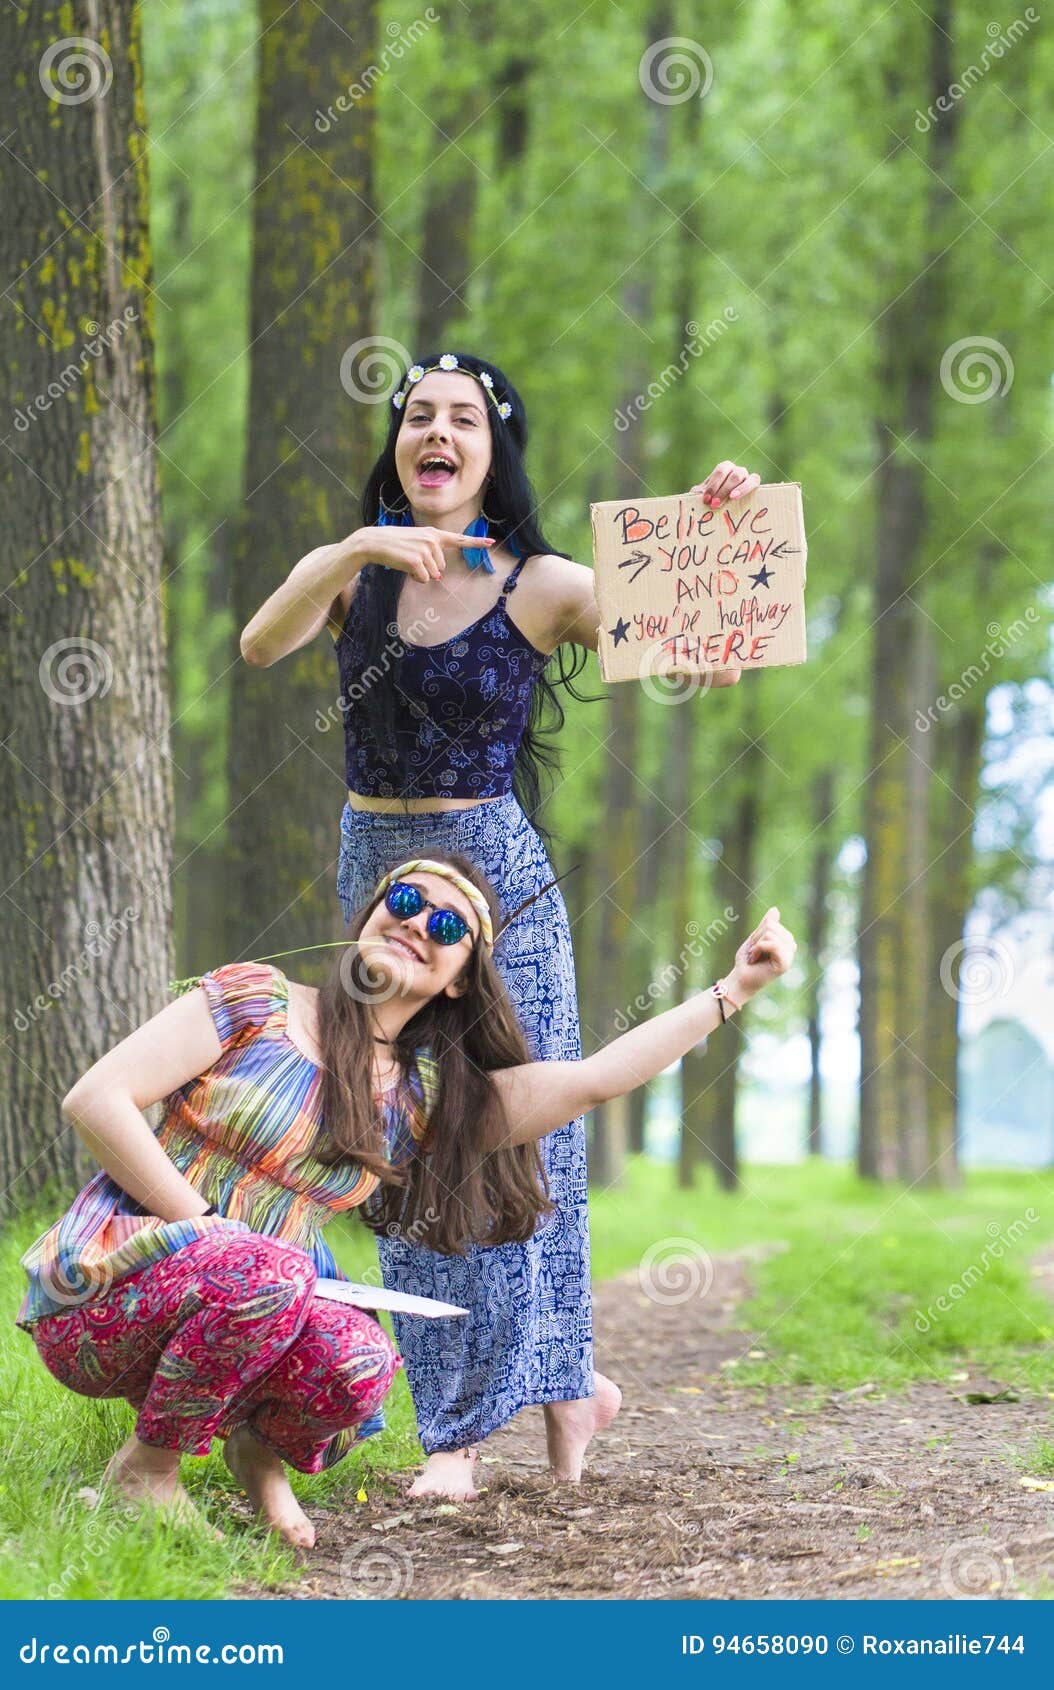 https://thumbs.dreamstime.com/z/hippie-girls-woods-two-hitchhiking-barefoot-forest-romanian-countryside-june-94658090.jpg